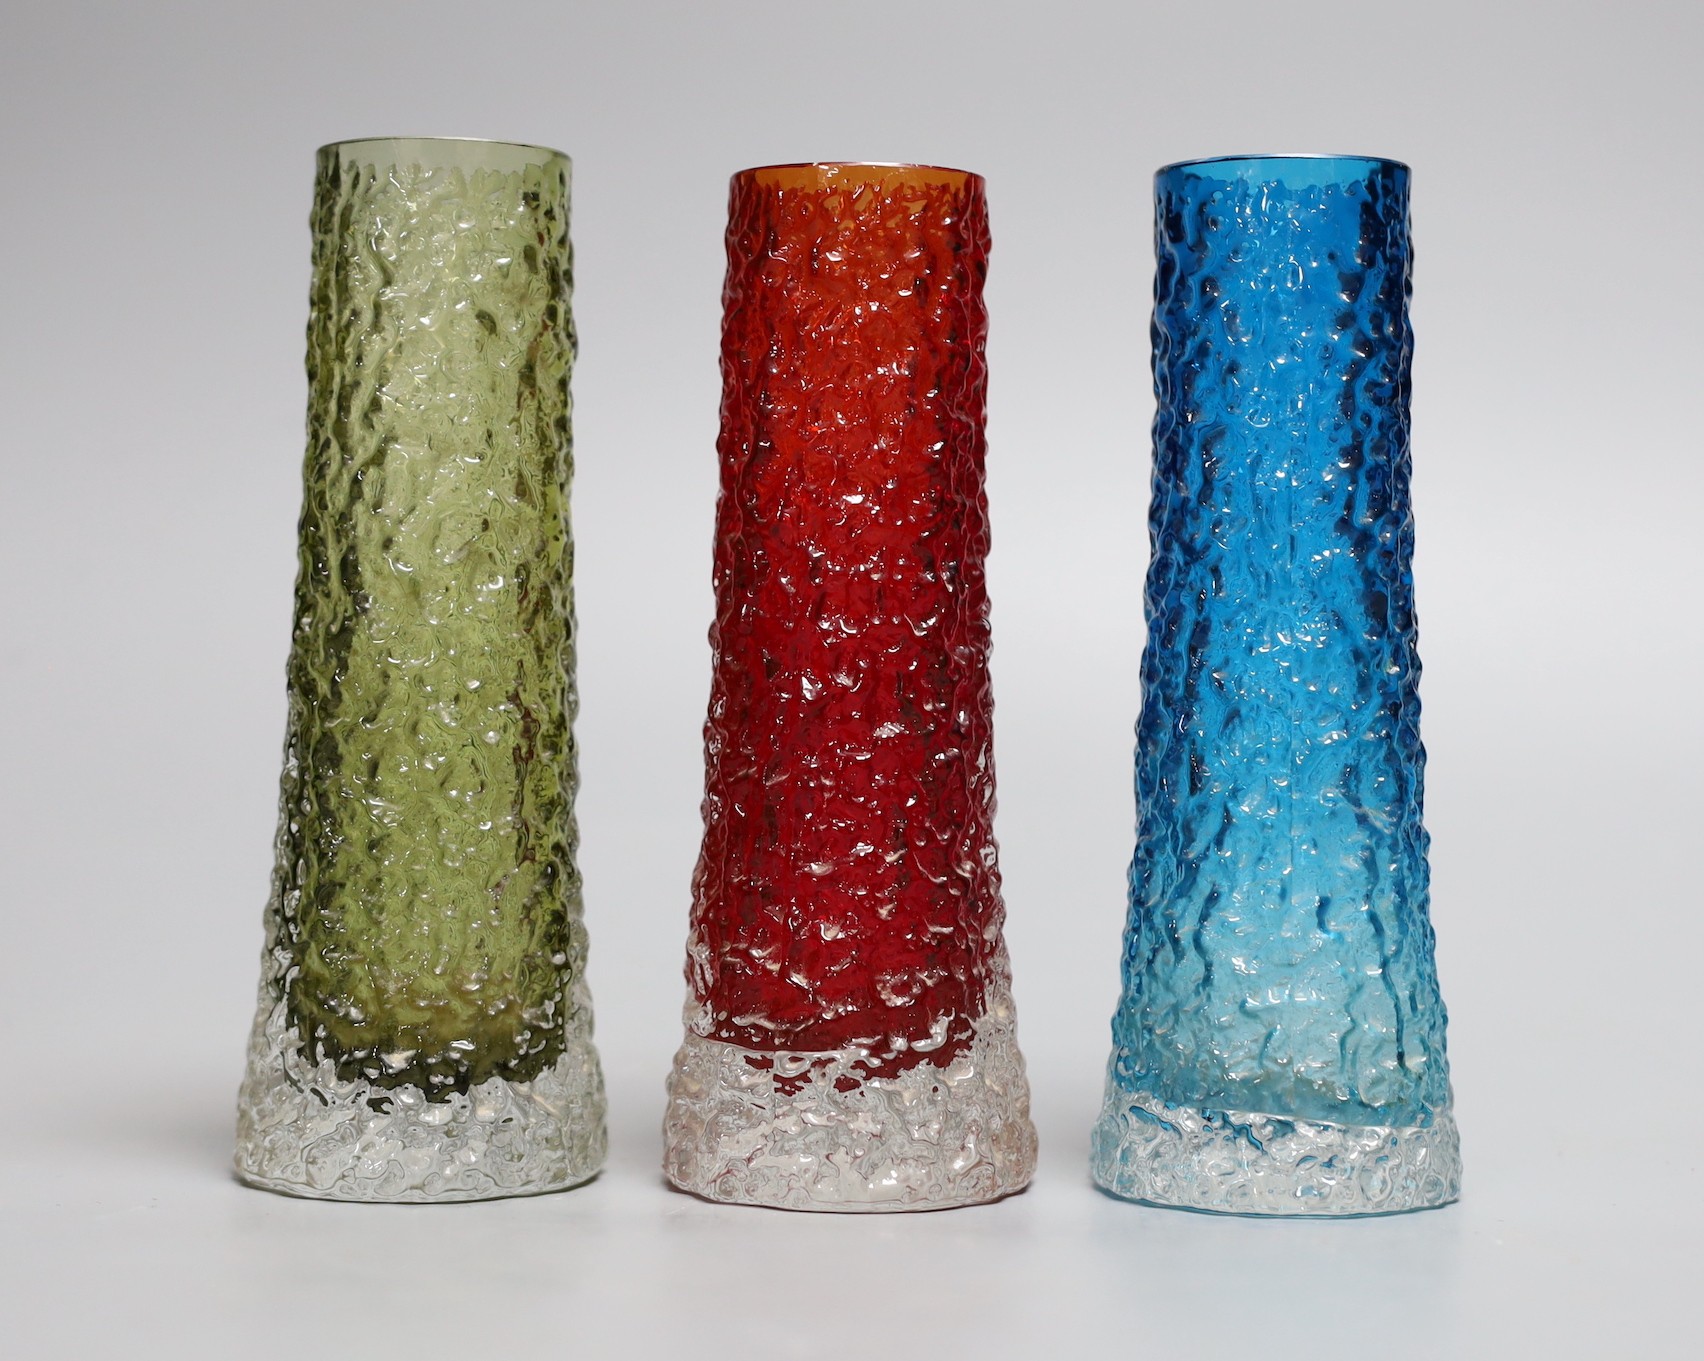 A trio of tapering 'bark' Whitefriar vases, model 9729 designed by Geoffrey Baxter, in red, kingfisher blue and sage green glass, each 16cm high.